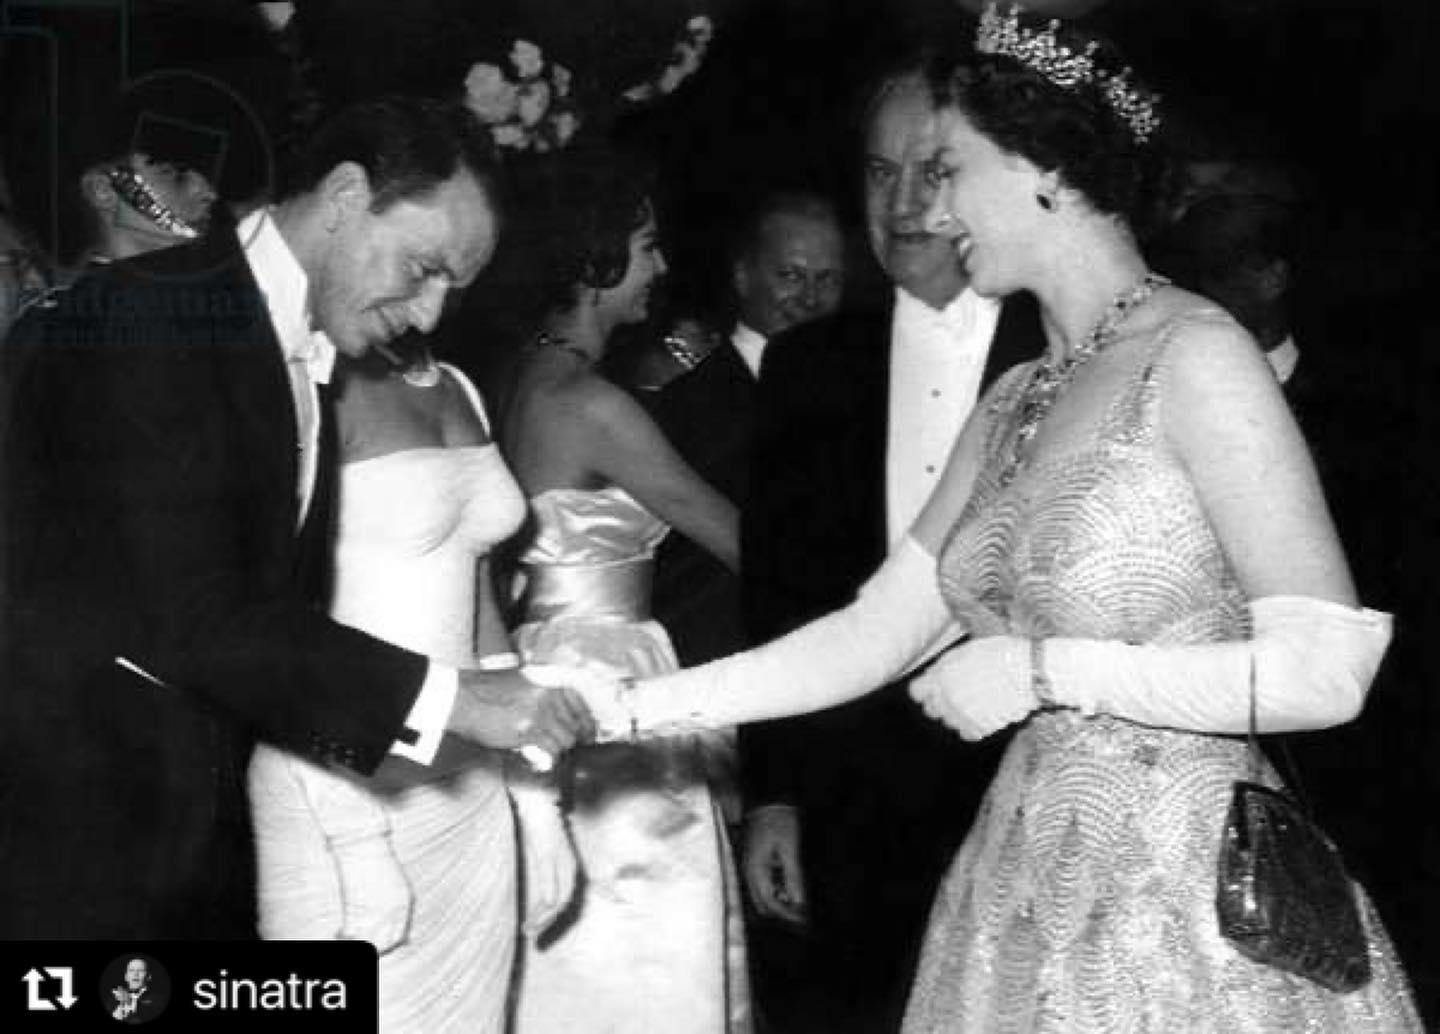 image  1 Jazz News - Frank Sinatra bows as he meets the Queen at the premiere of the film me and the Colonel